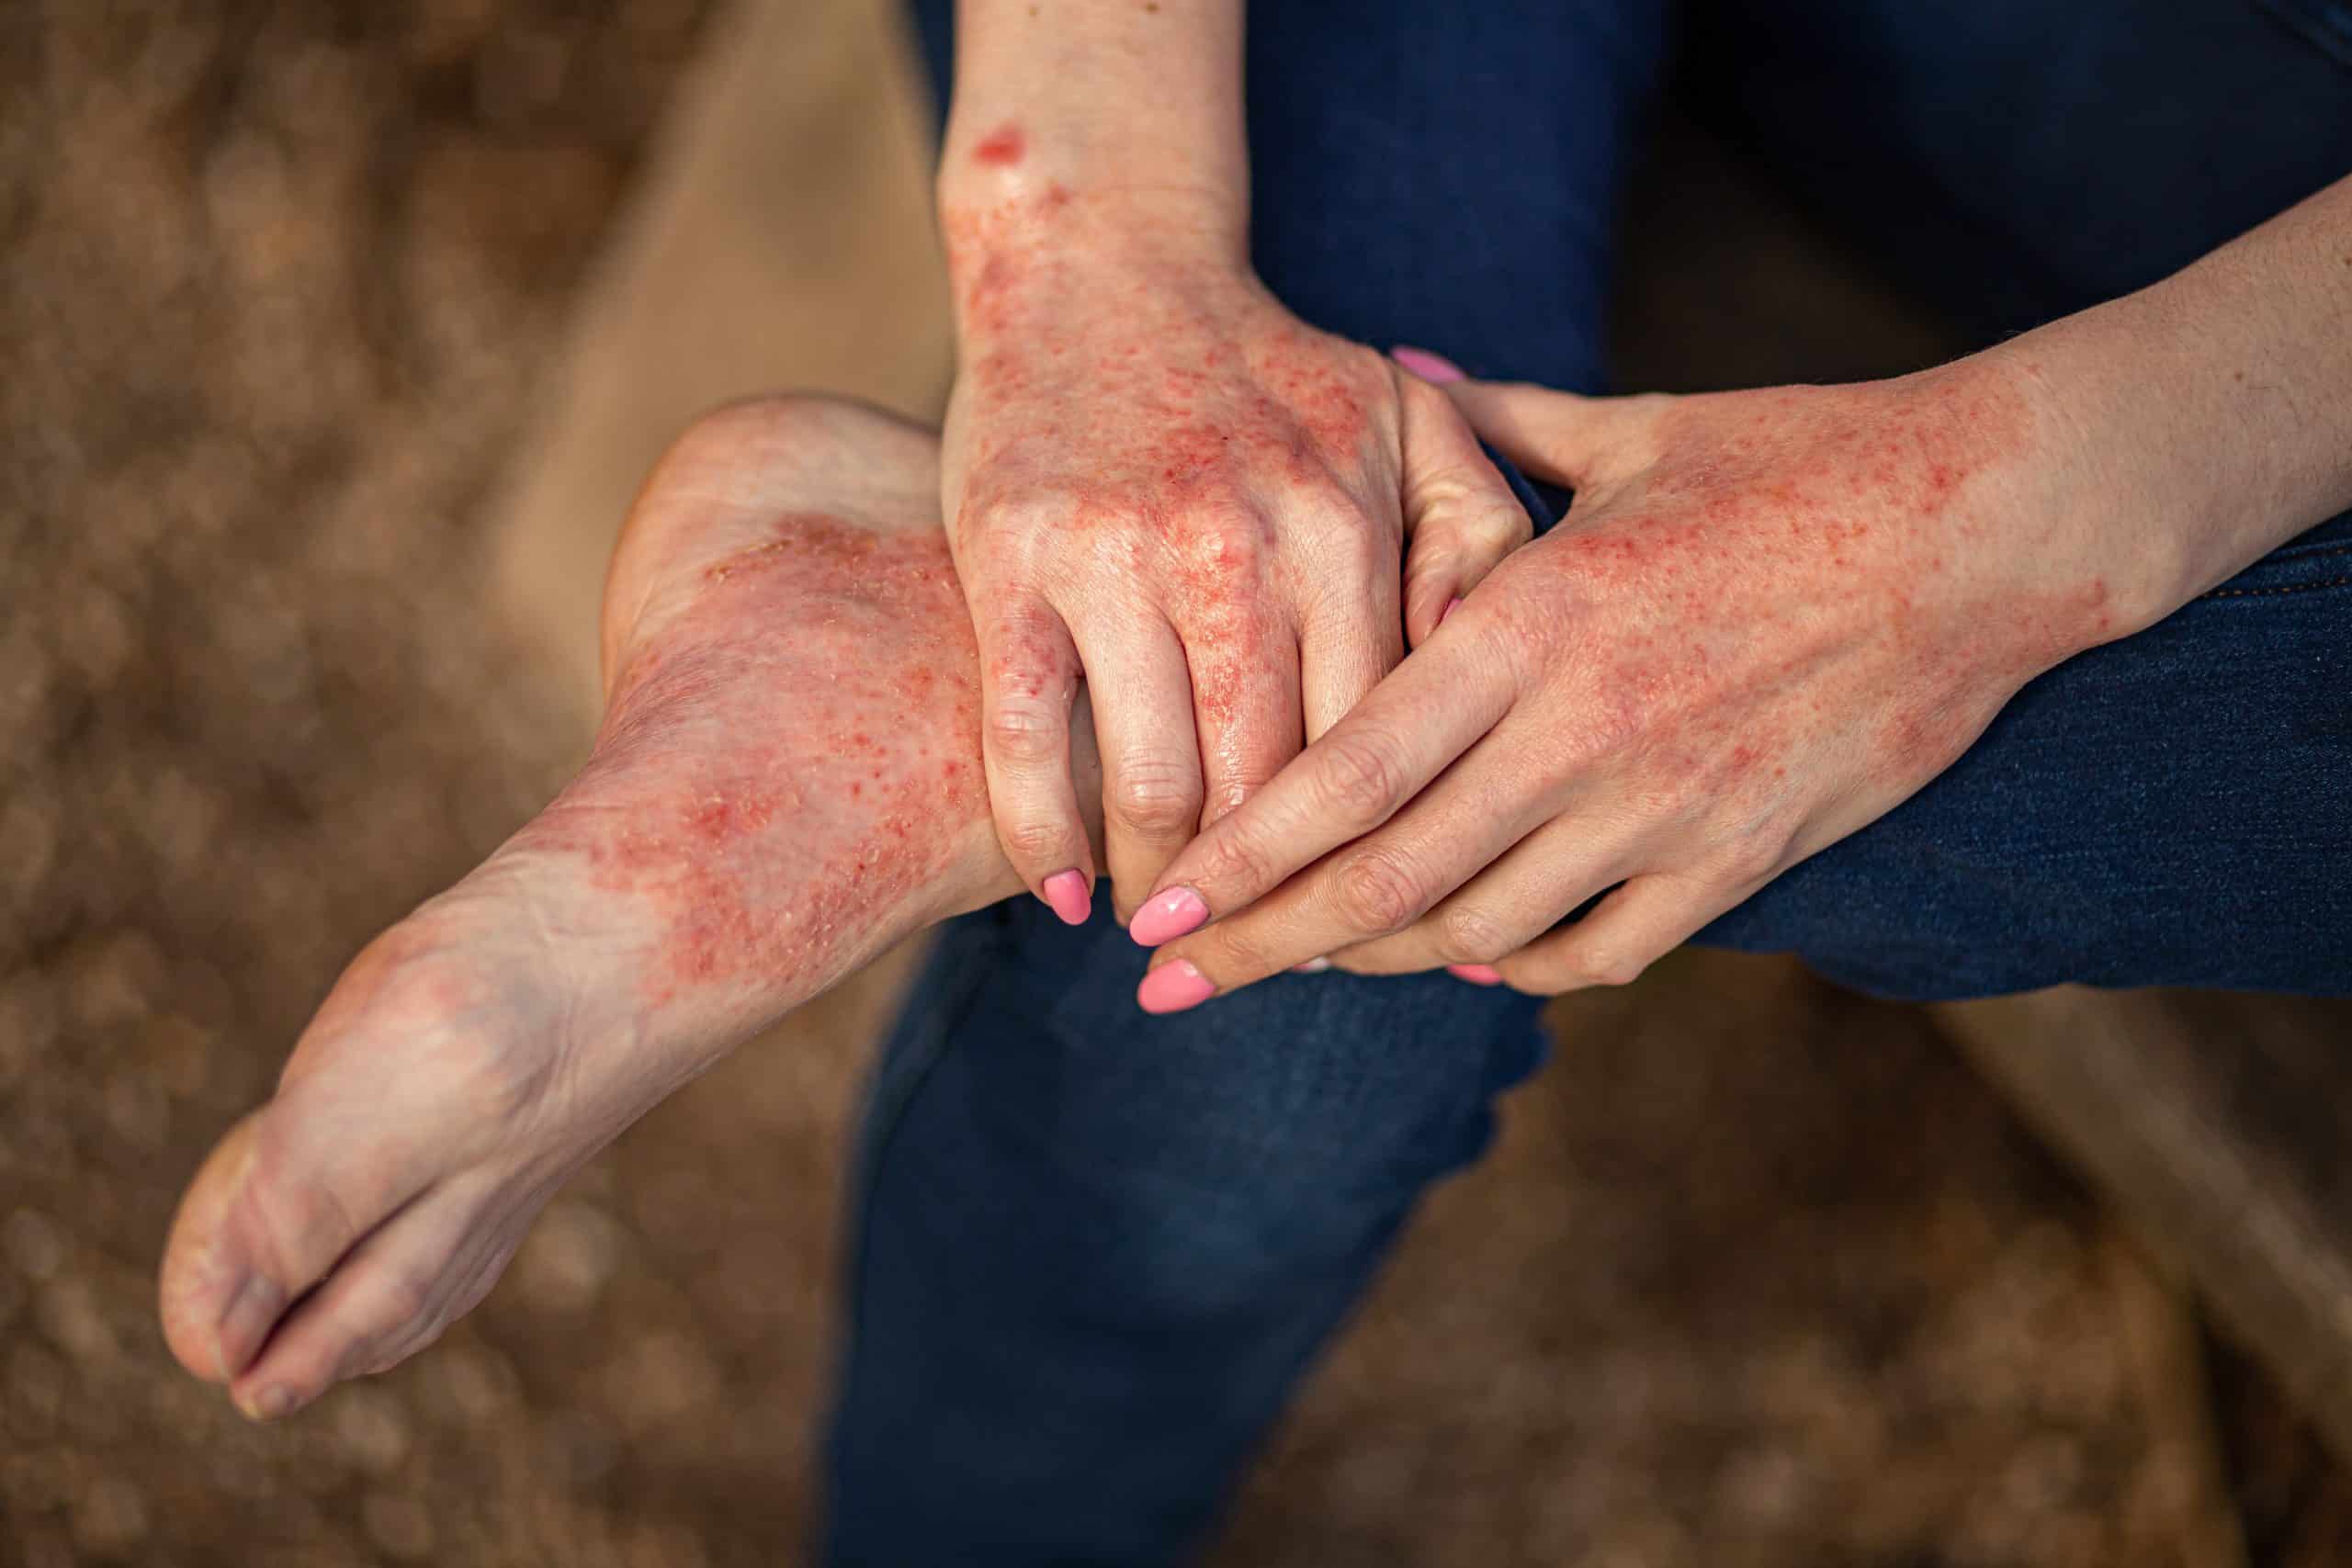 A woman with eczema examines her hands and foot.